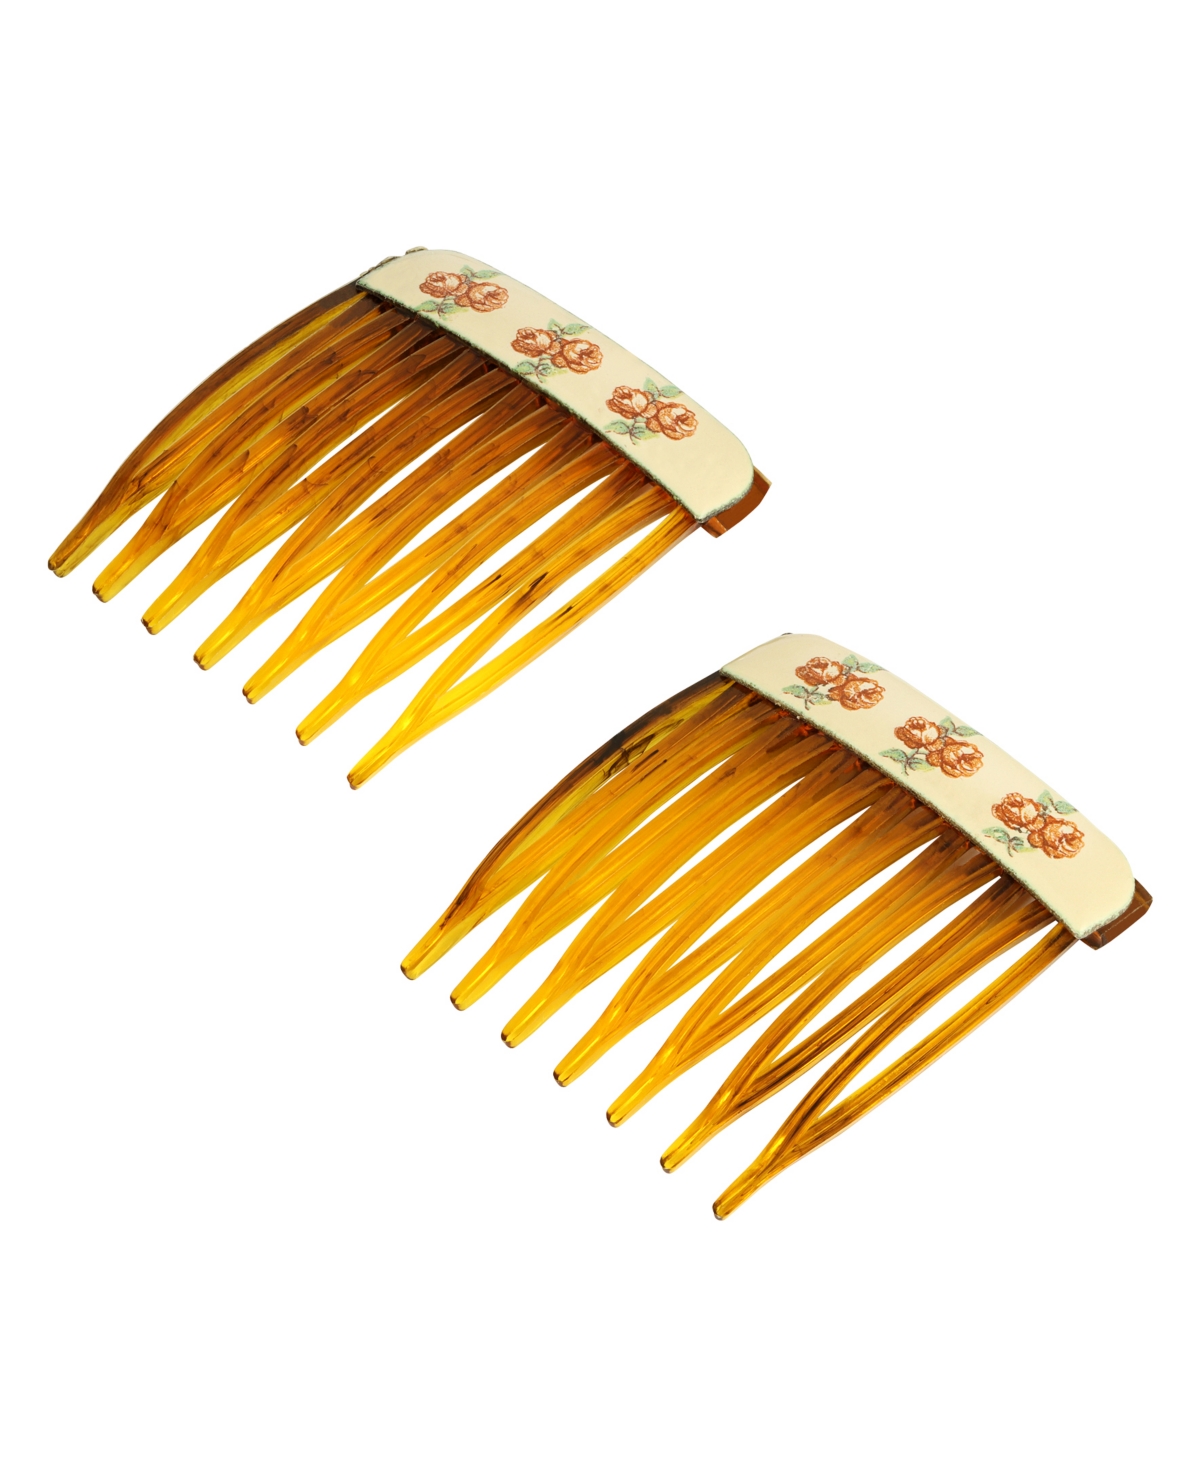 2028 Acrylic Floral Hair Comb Set, 2 Piece In White